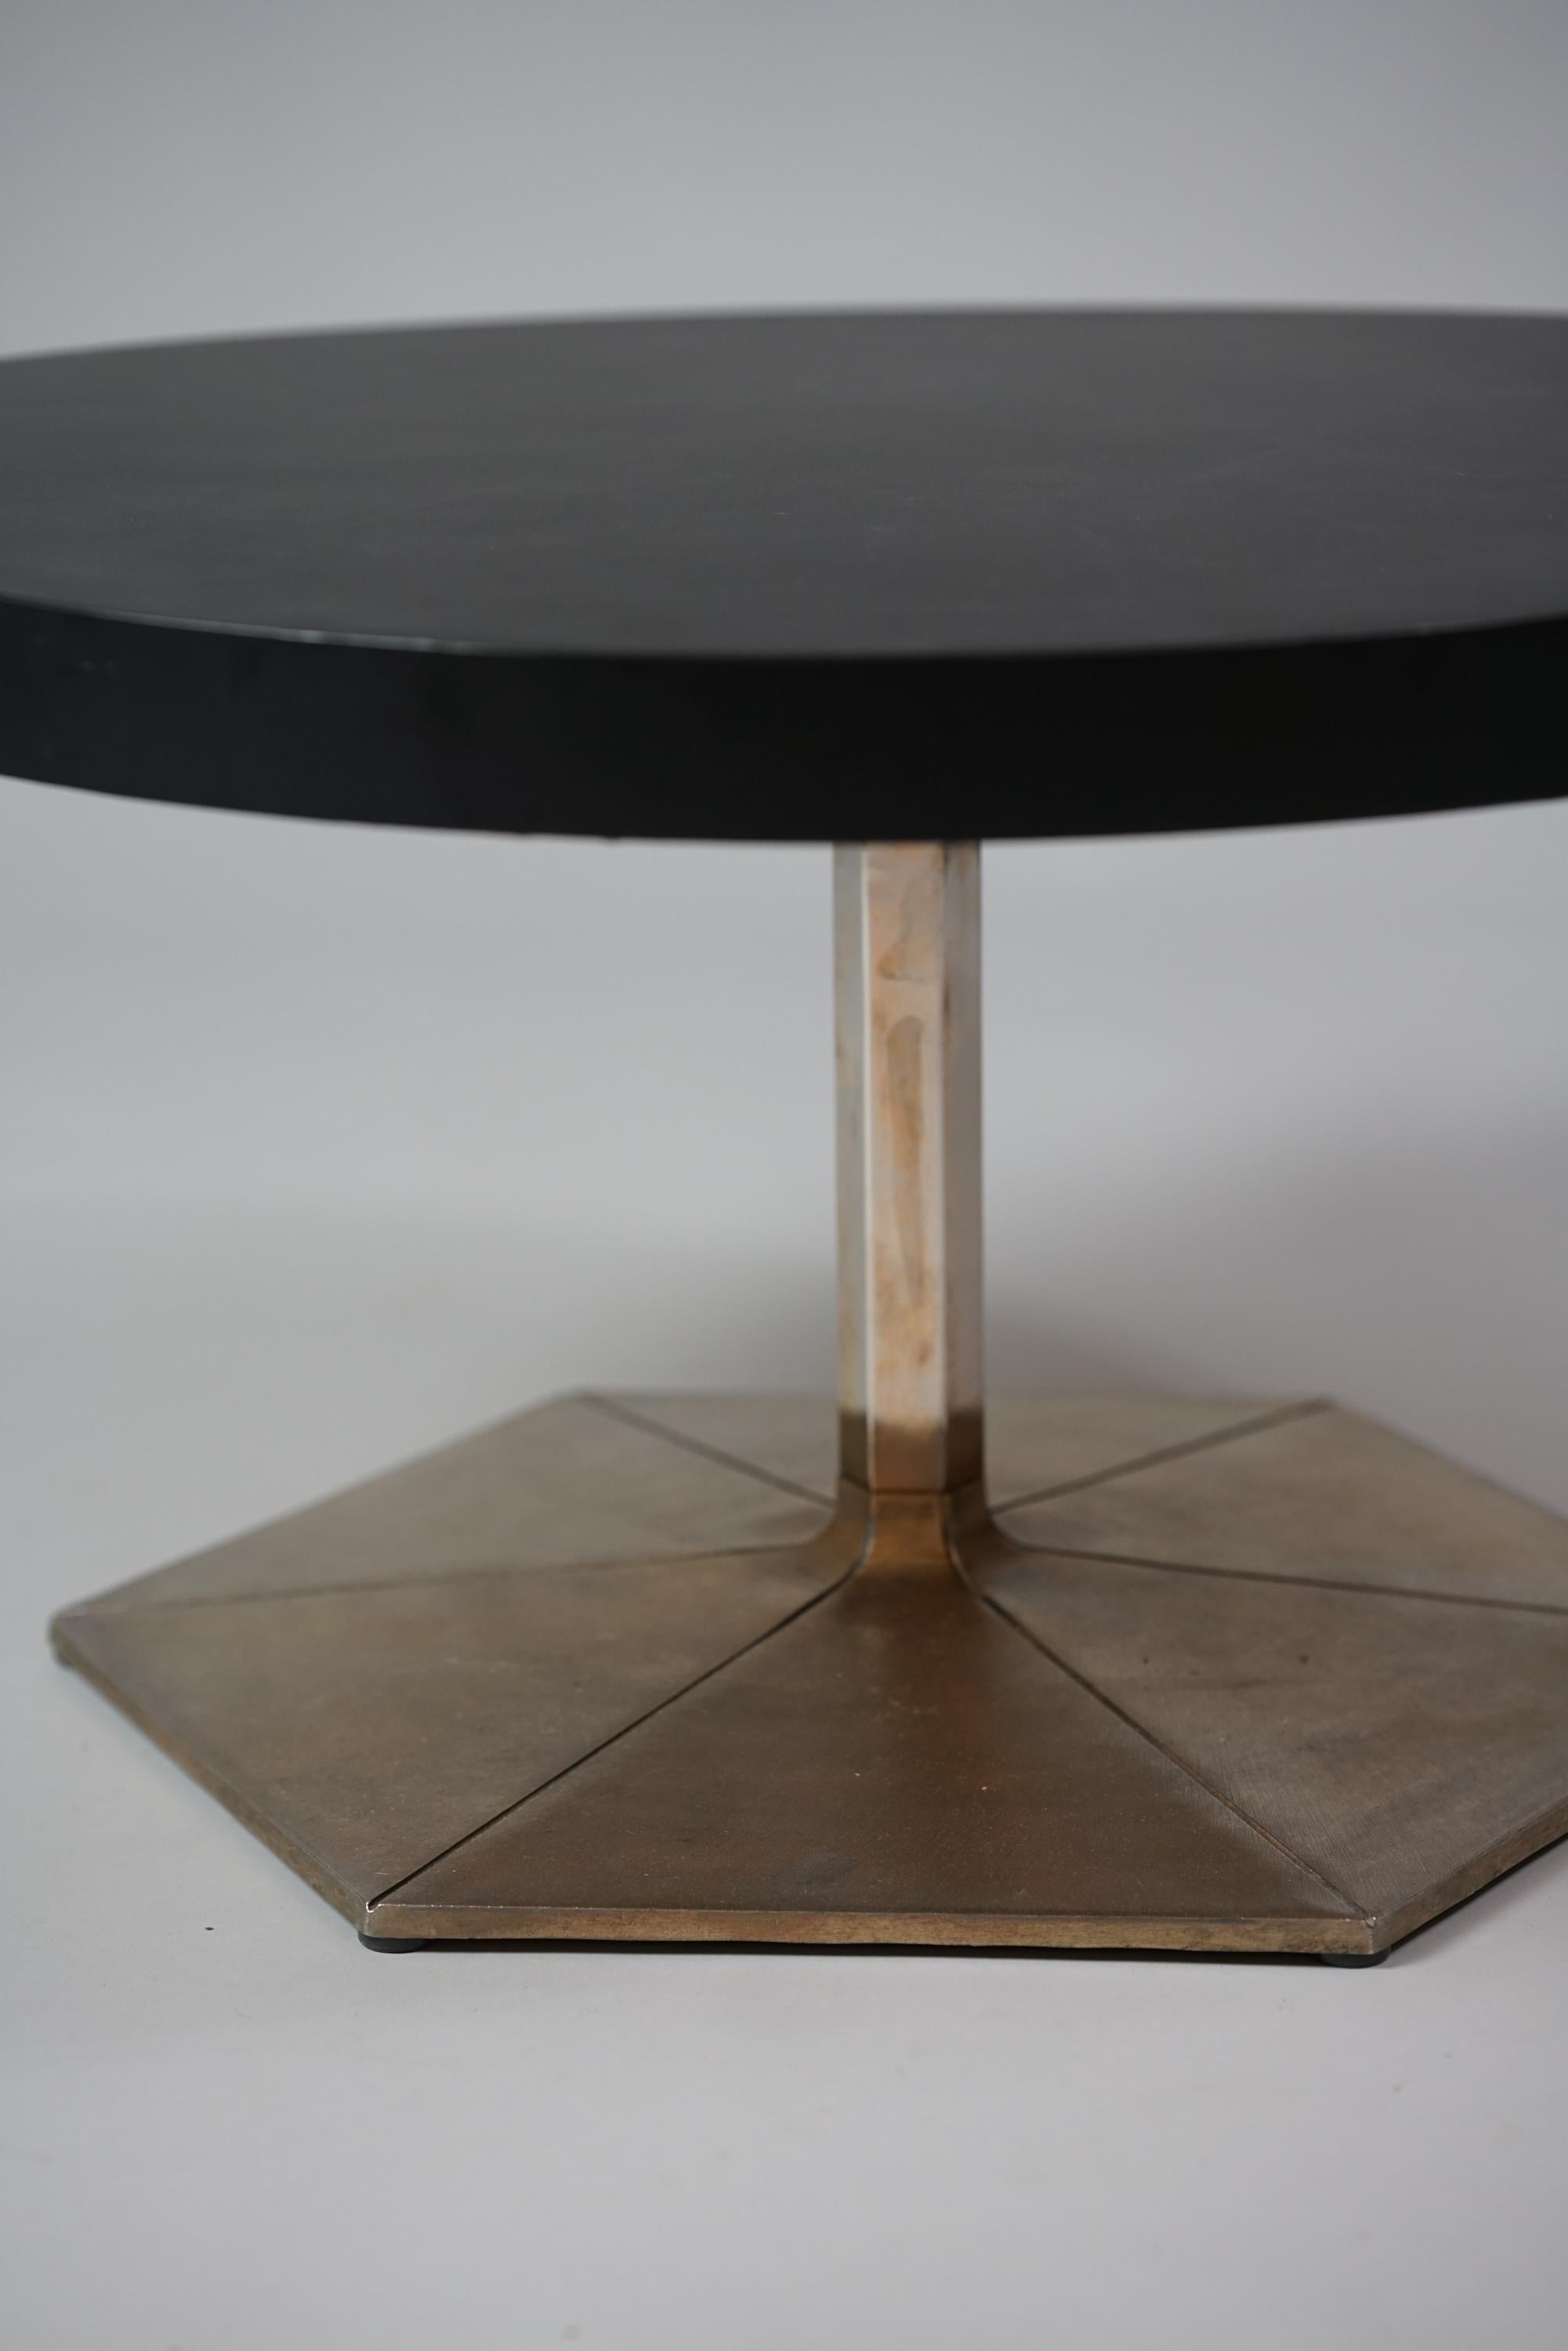 Model Prisma coffee table by Voitto Haapalainen for Tehokaluste Oy from the 1970s. Wood and steel. Iconic design. Good vintage condition, patina and wear consistent with age and use. 